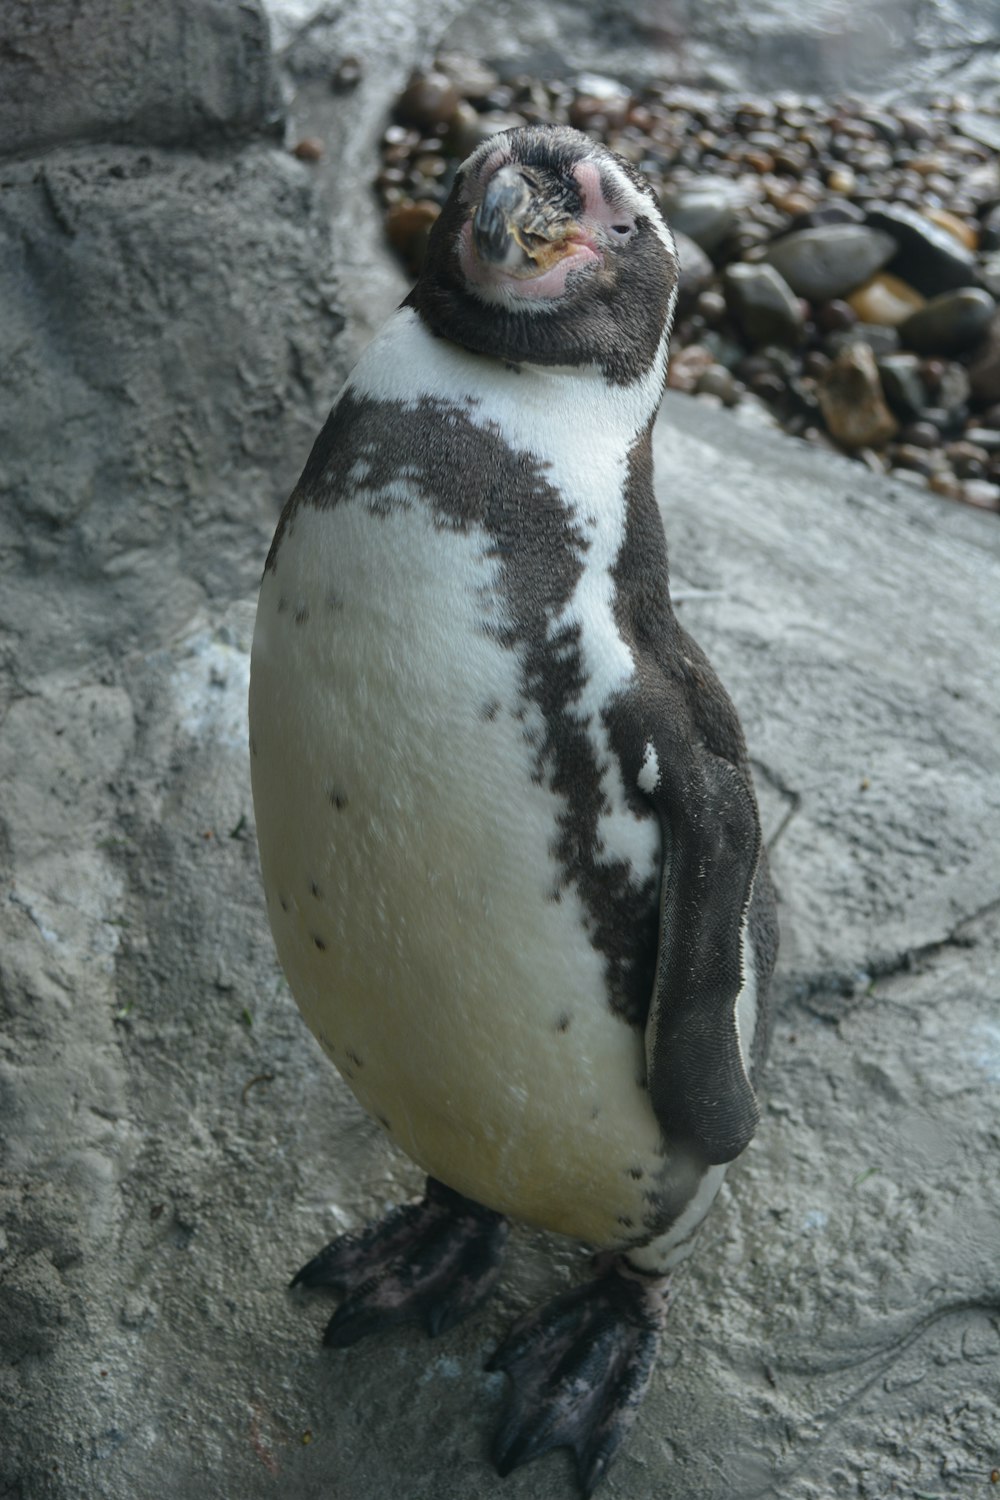 a small penguin standing on a rock next to a pile of rocks